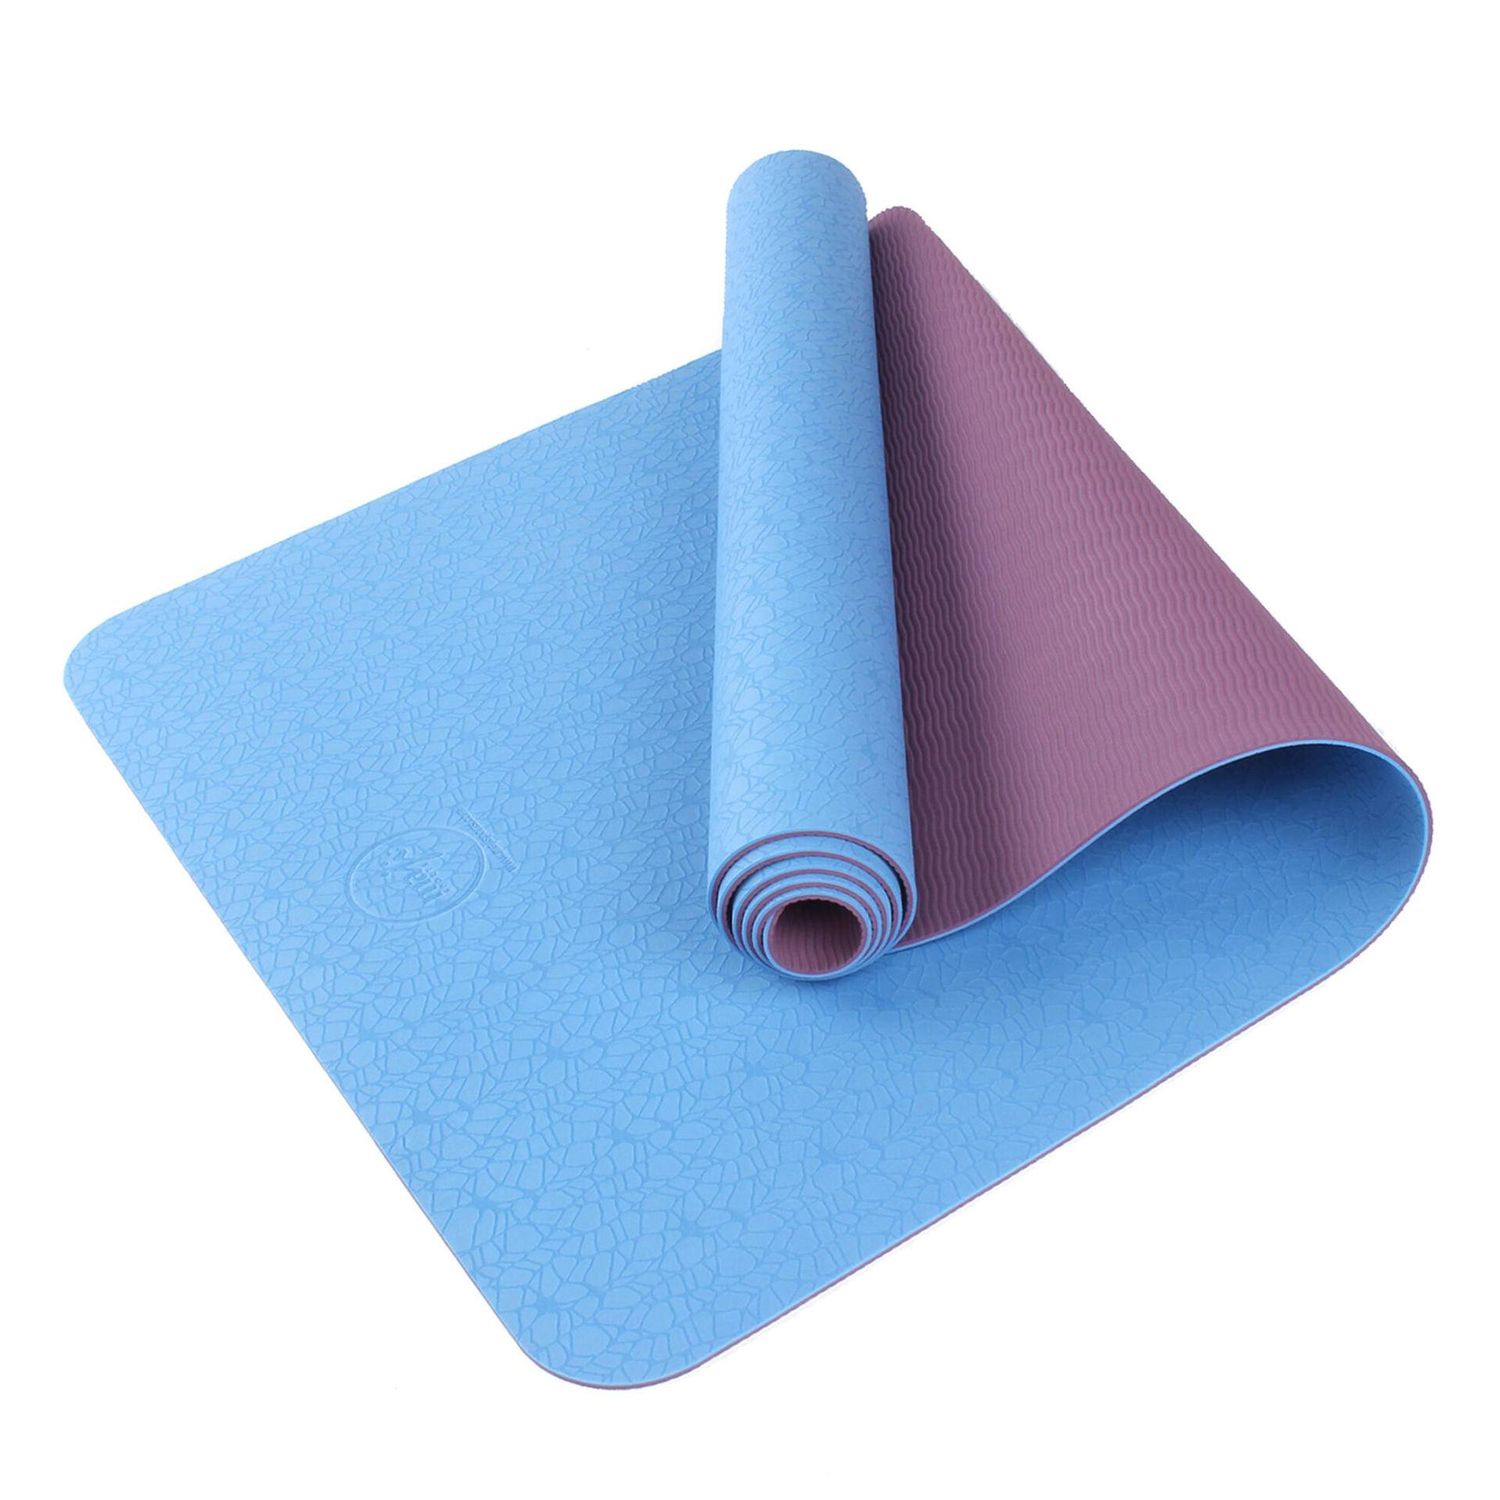 Best Gym Owner's Yoga Mat Buying Guide In 2022